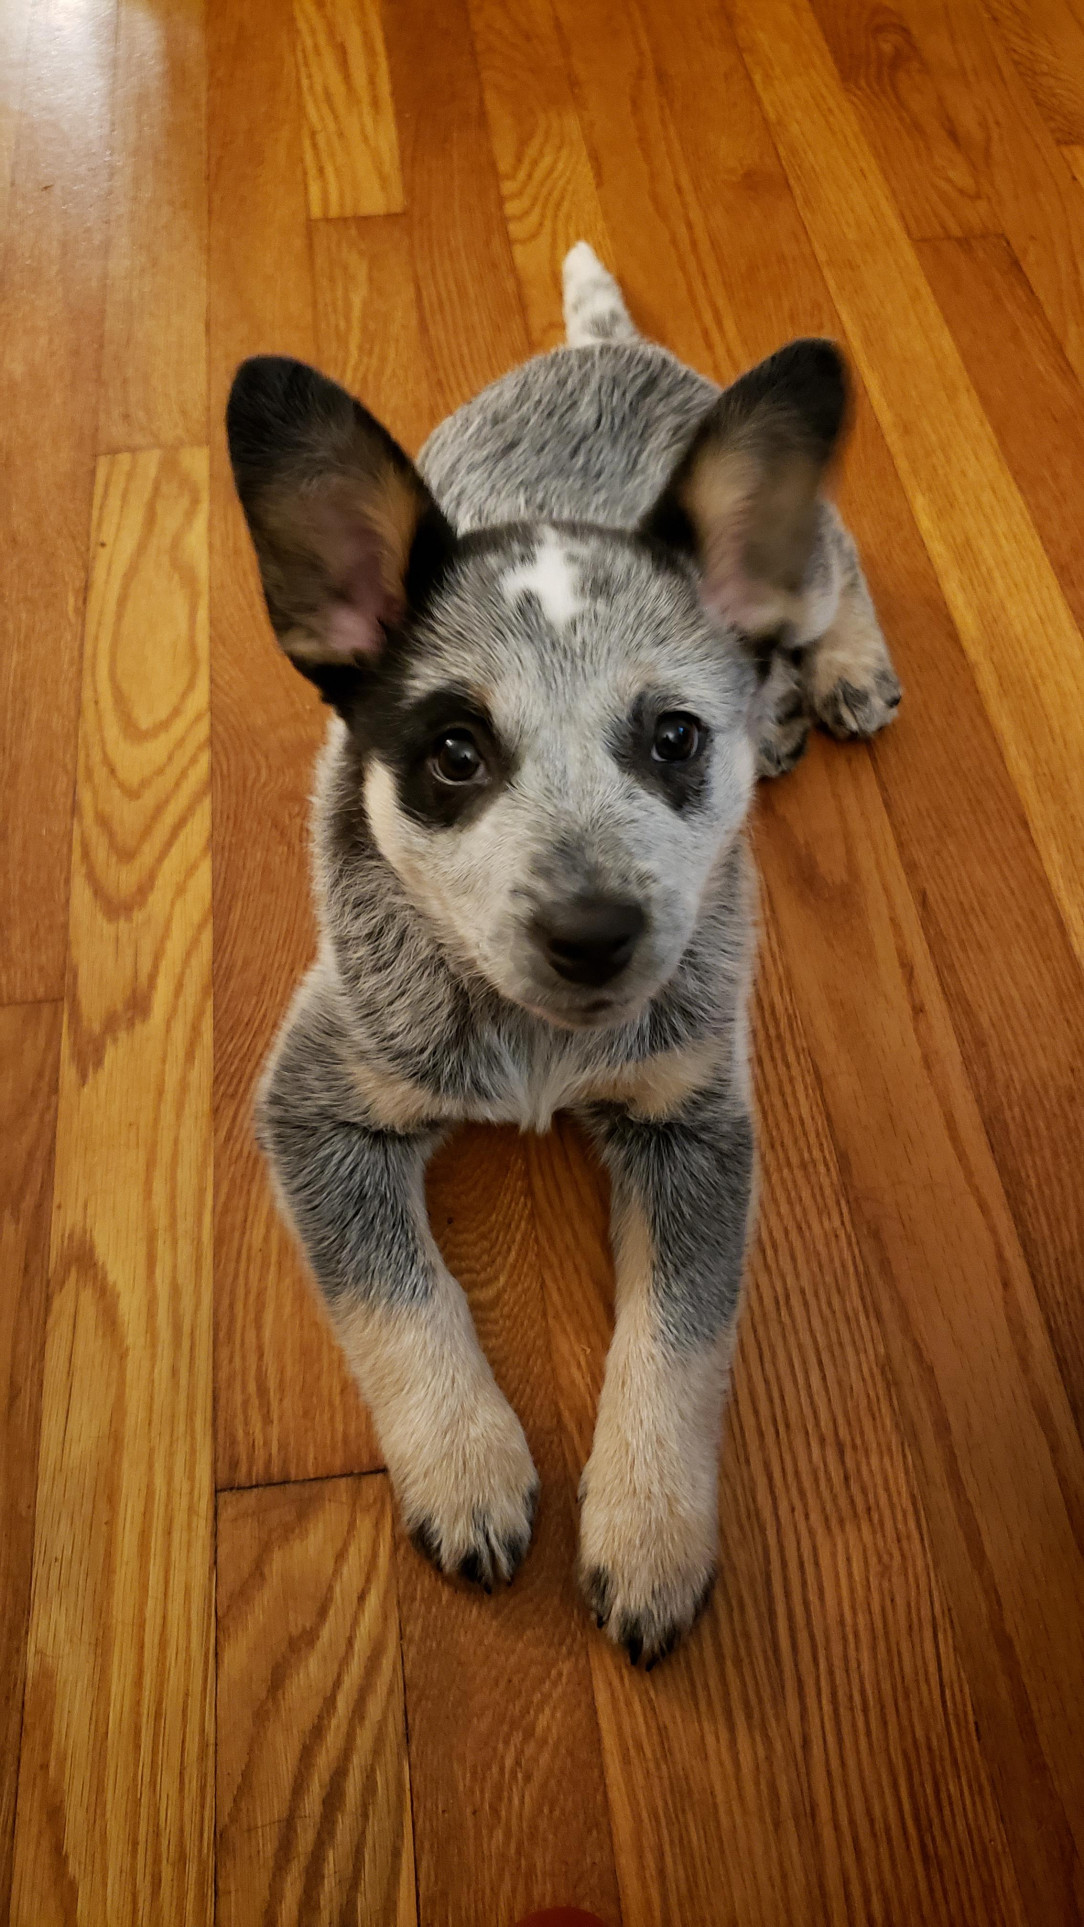 The blue healer was known as an Australian cattle dog 🐶